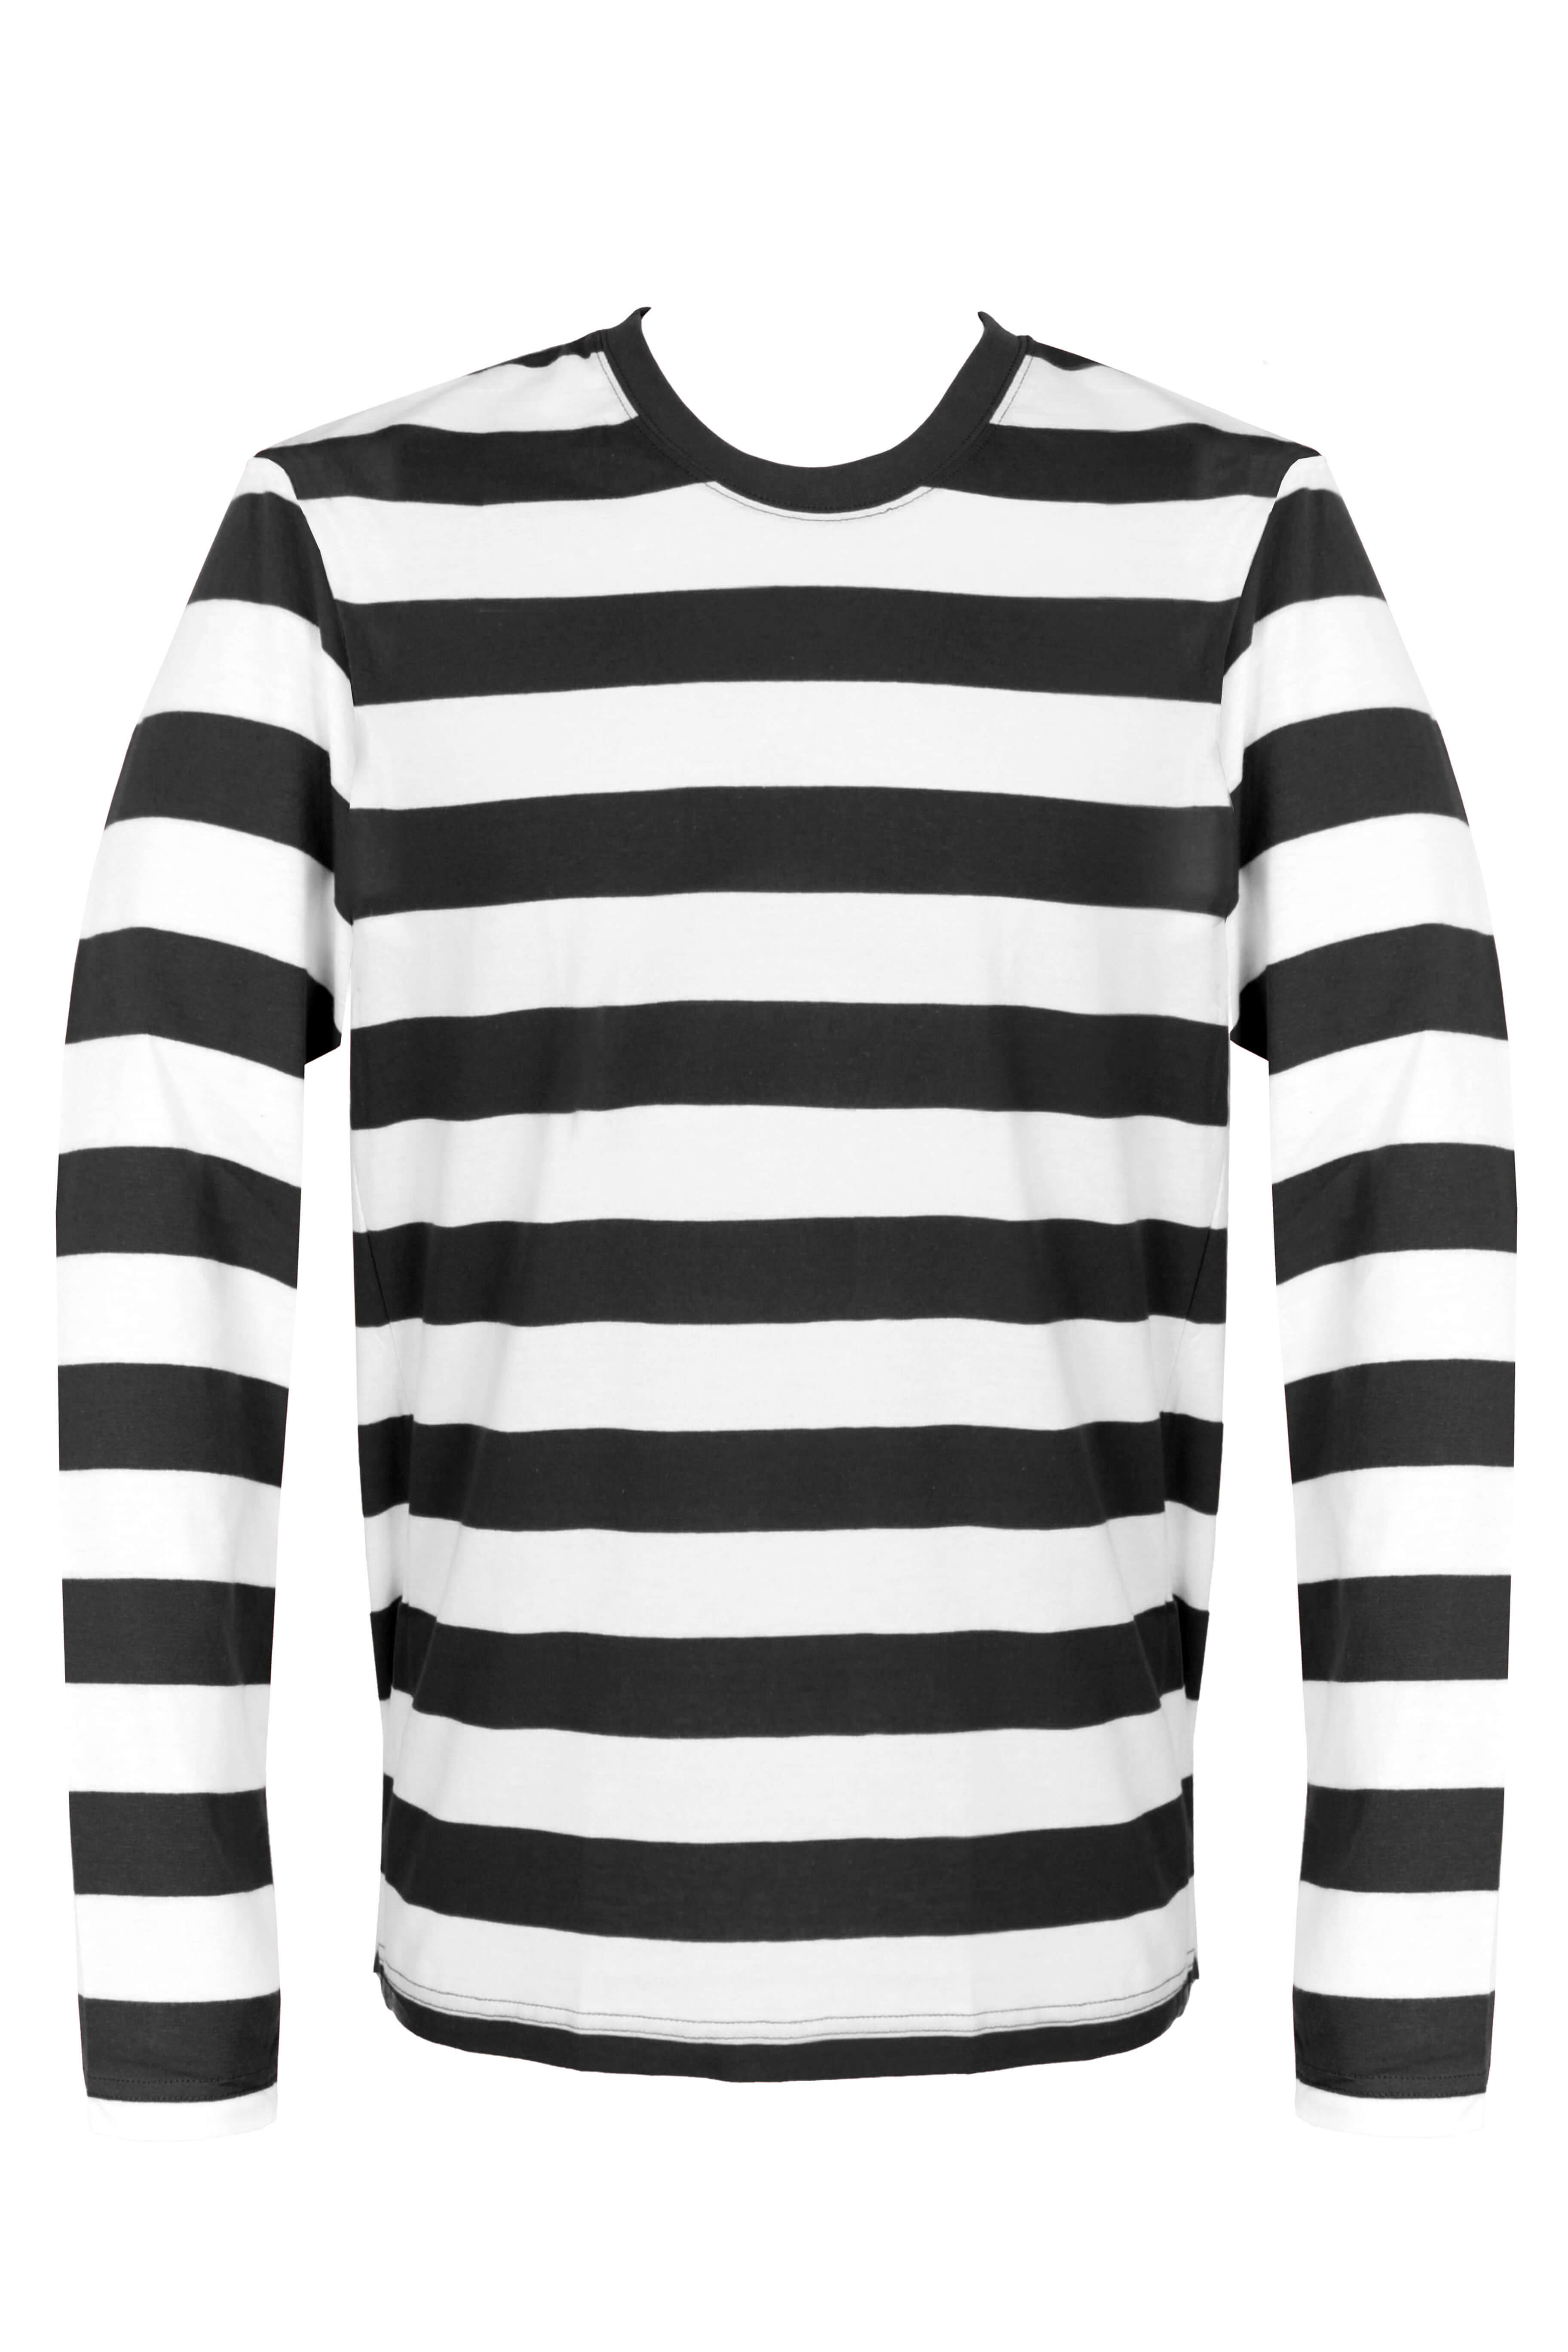 black and white striped long sleeve top